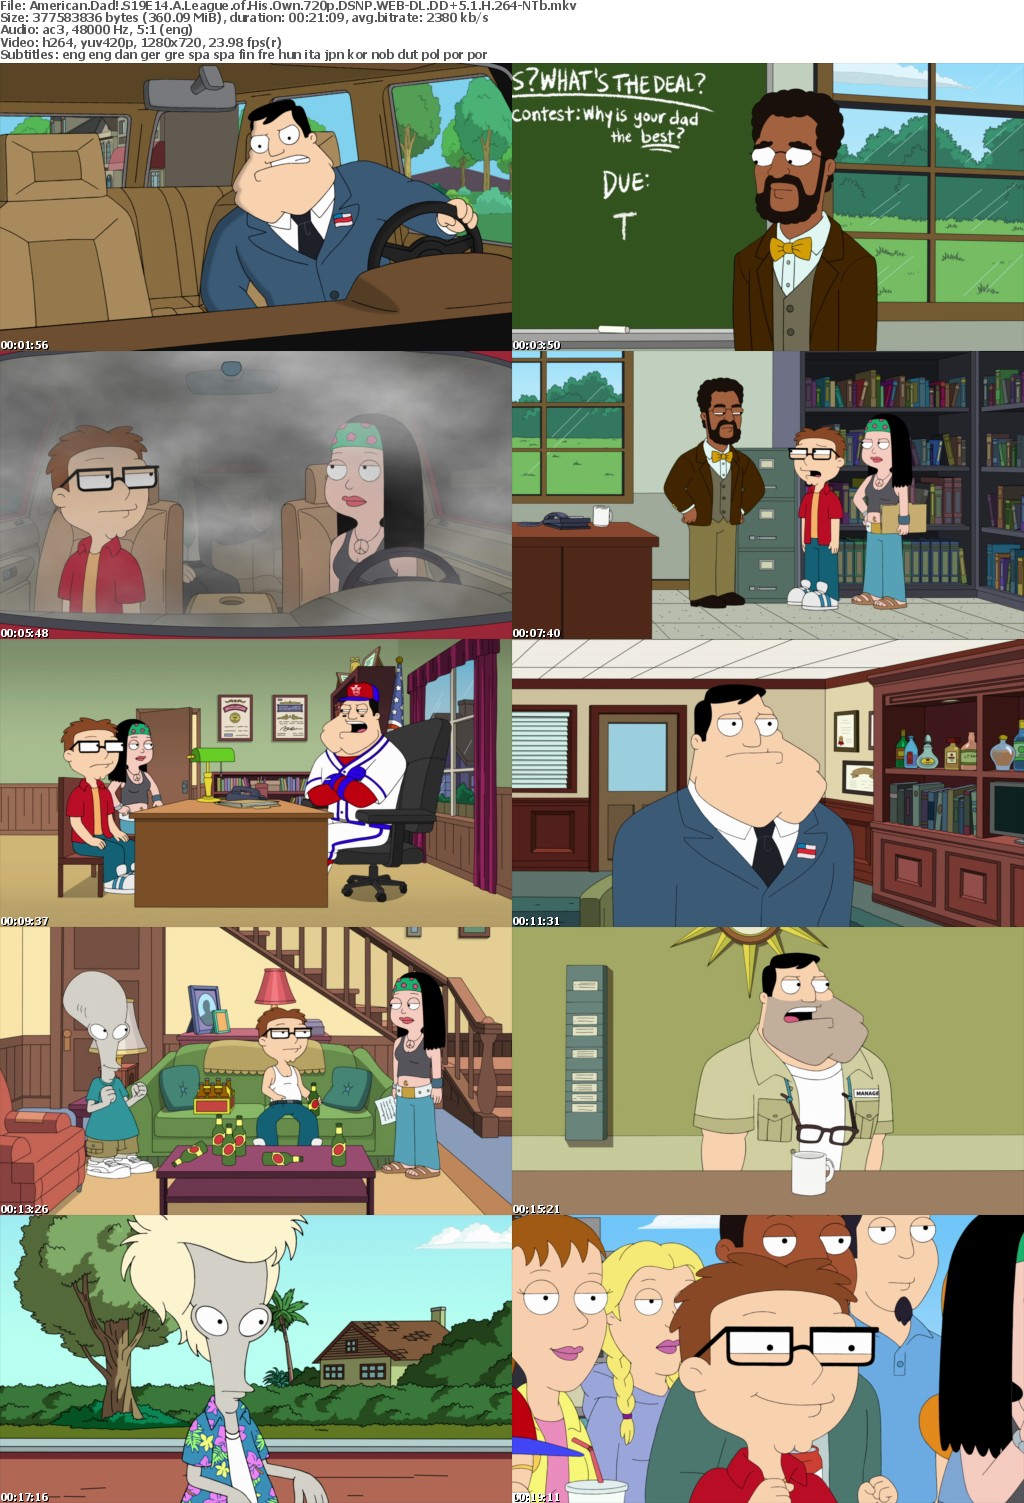 American Dad S19E14 A League of His Own 720p DSNP WEBRip DDP5 1 x264-NTb